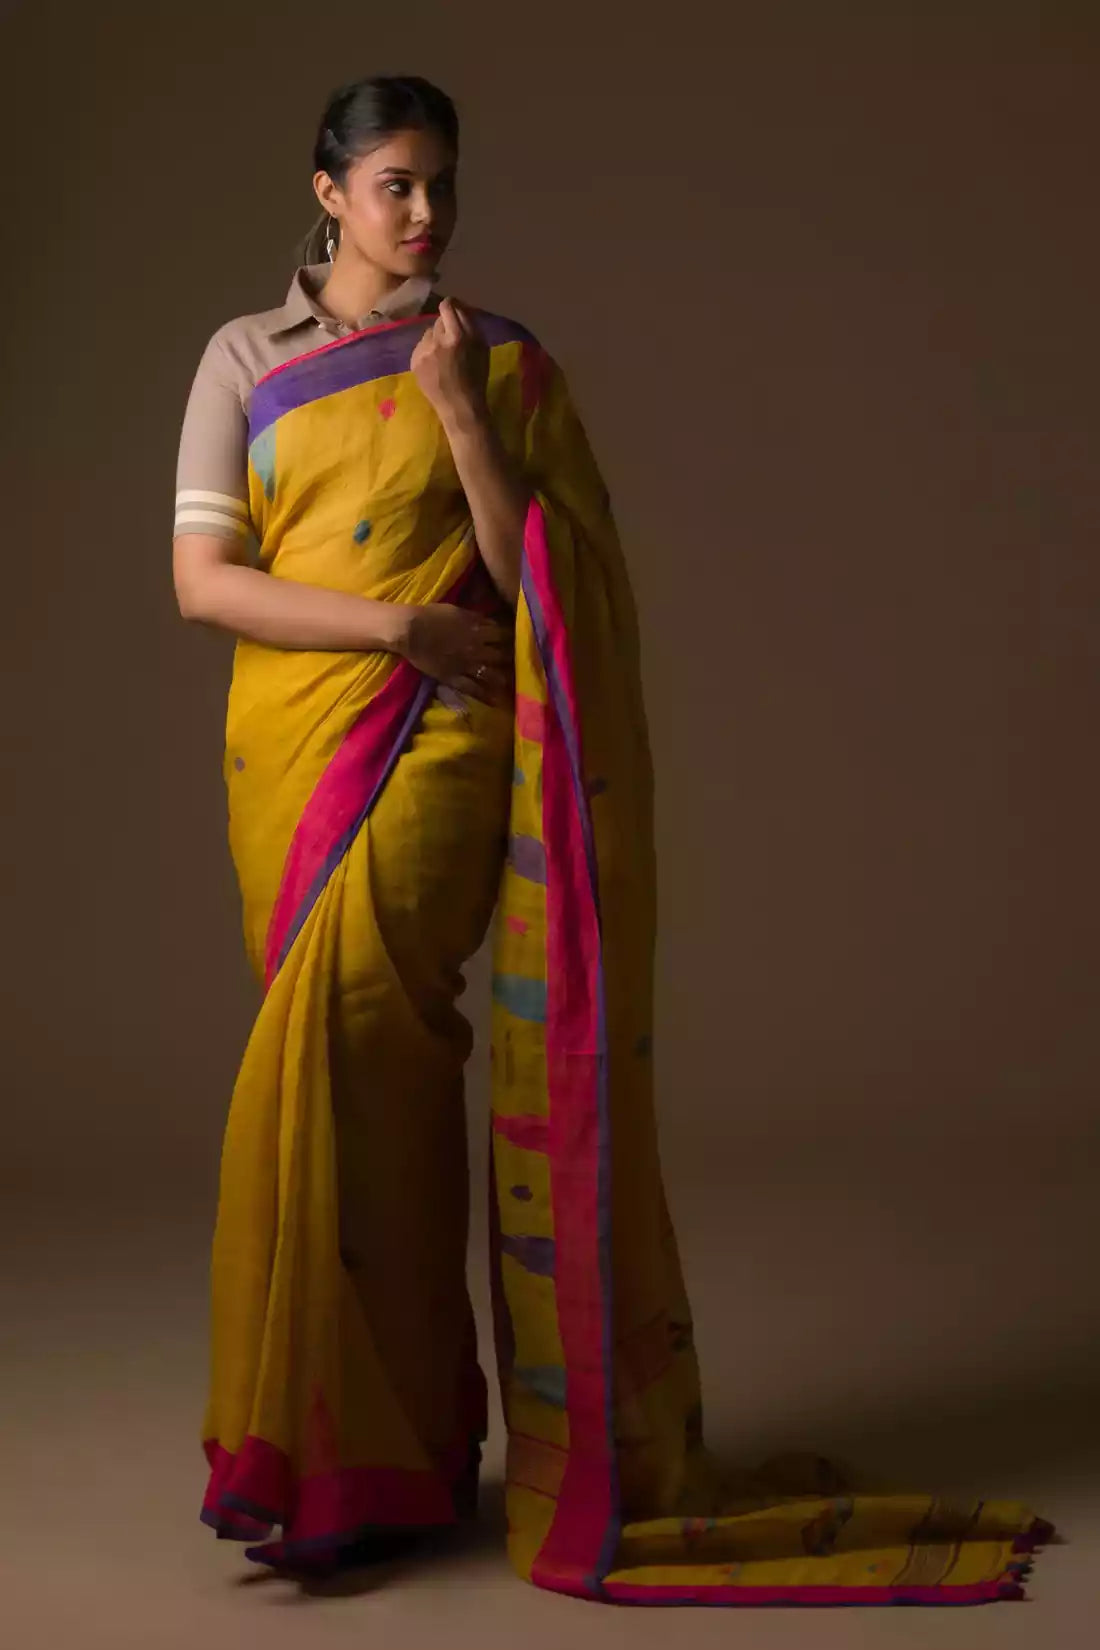 A lady in mustard with blue and pink border Jamdani hand weaving Saree standing against a brown background.